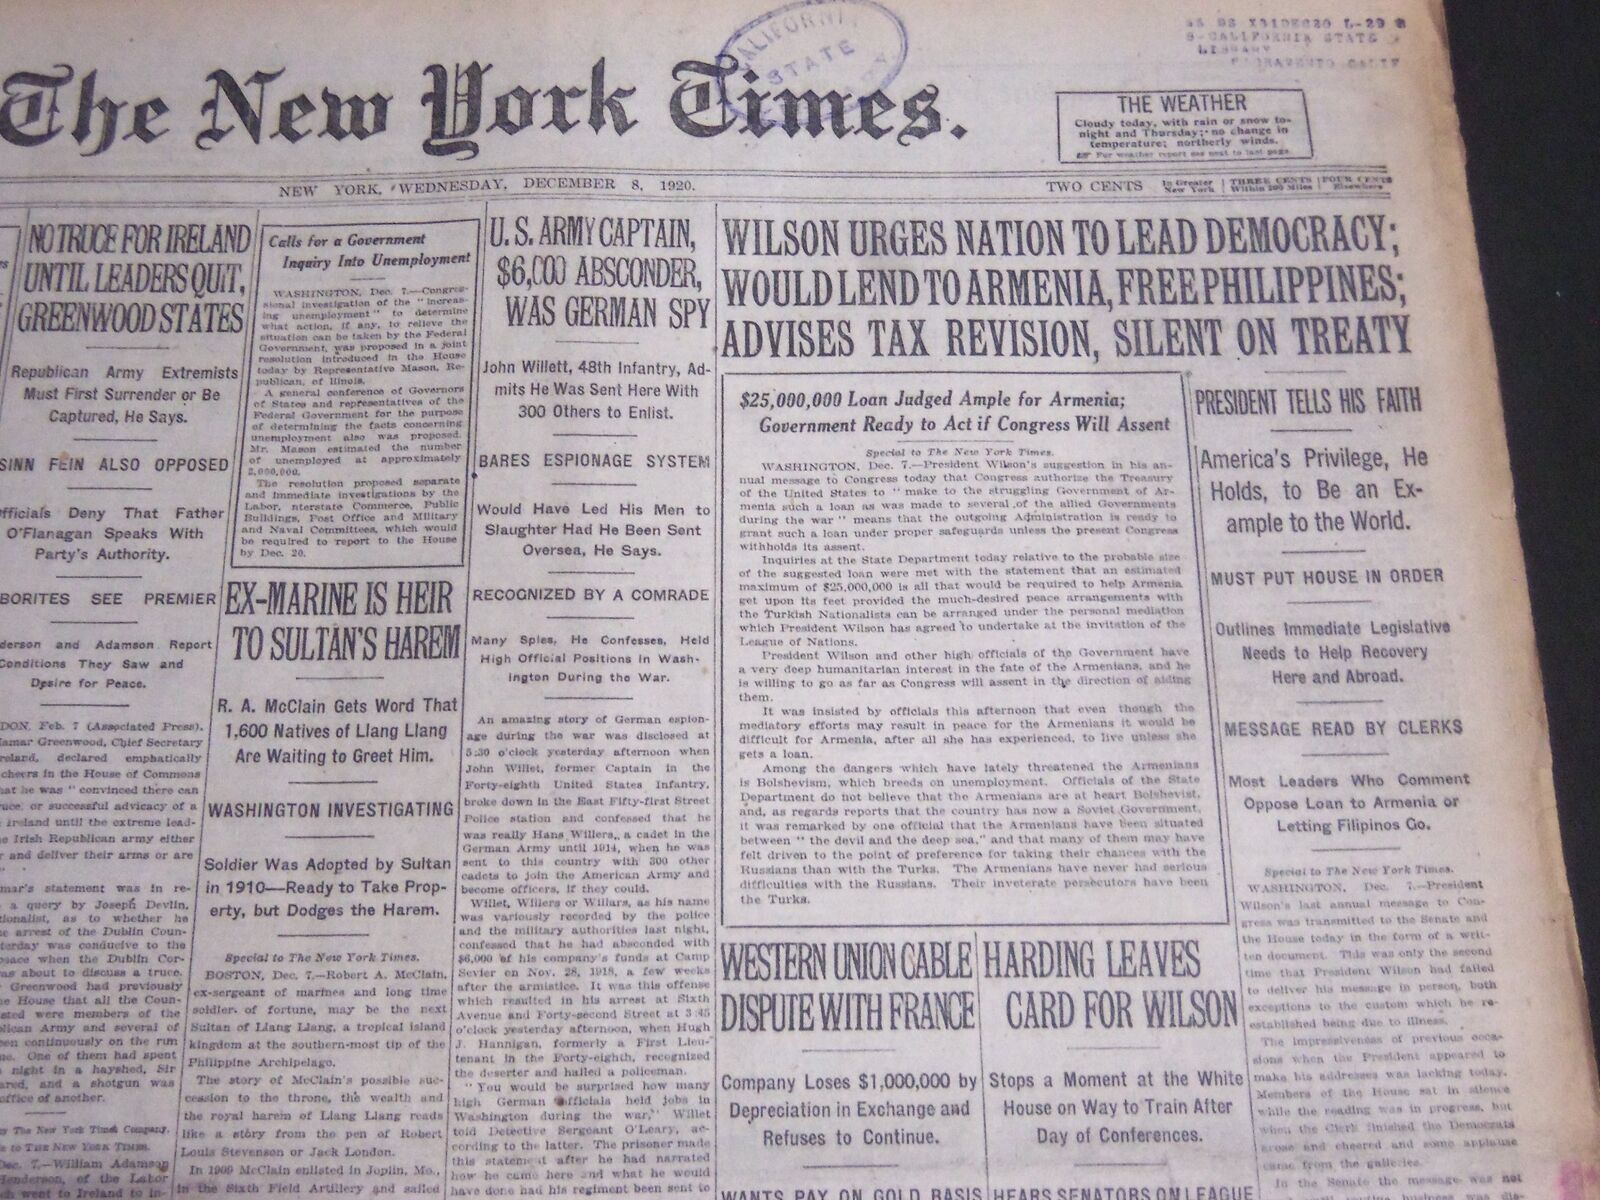 1920 DECEMBER 8 NEW YORK TIMES - WILSON URGES NATION TO LEAD DEMOCRACY - NT 6757